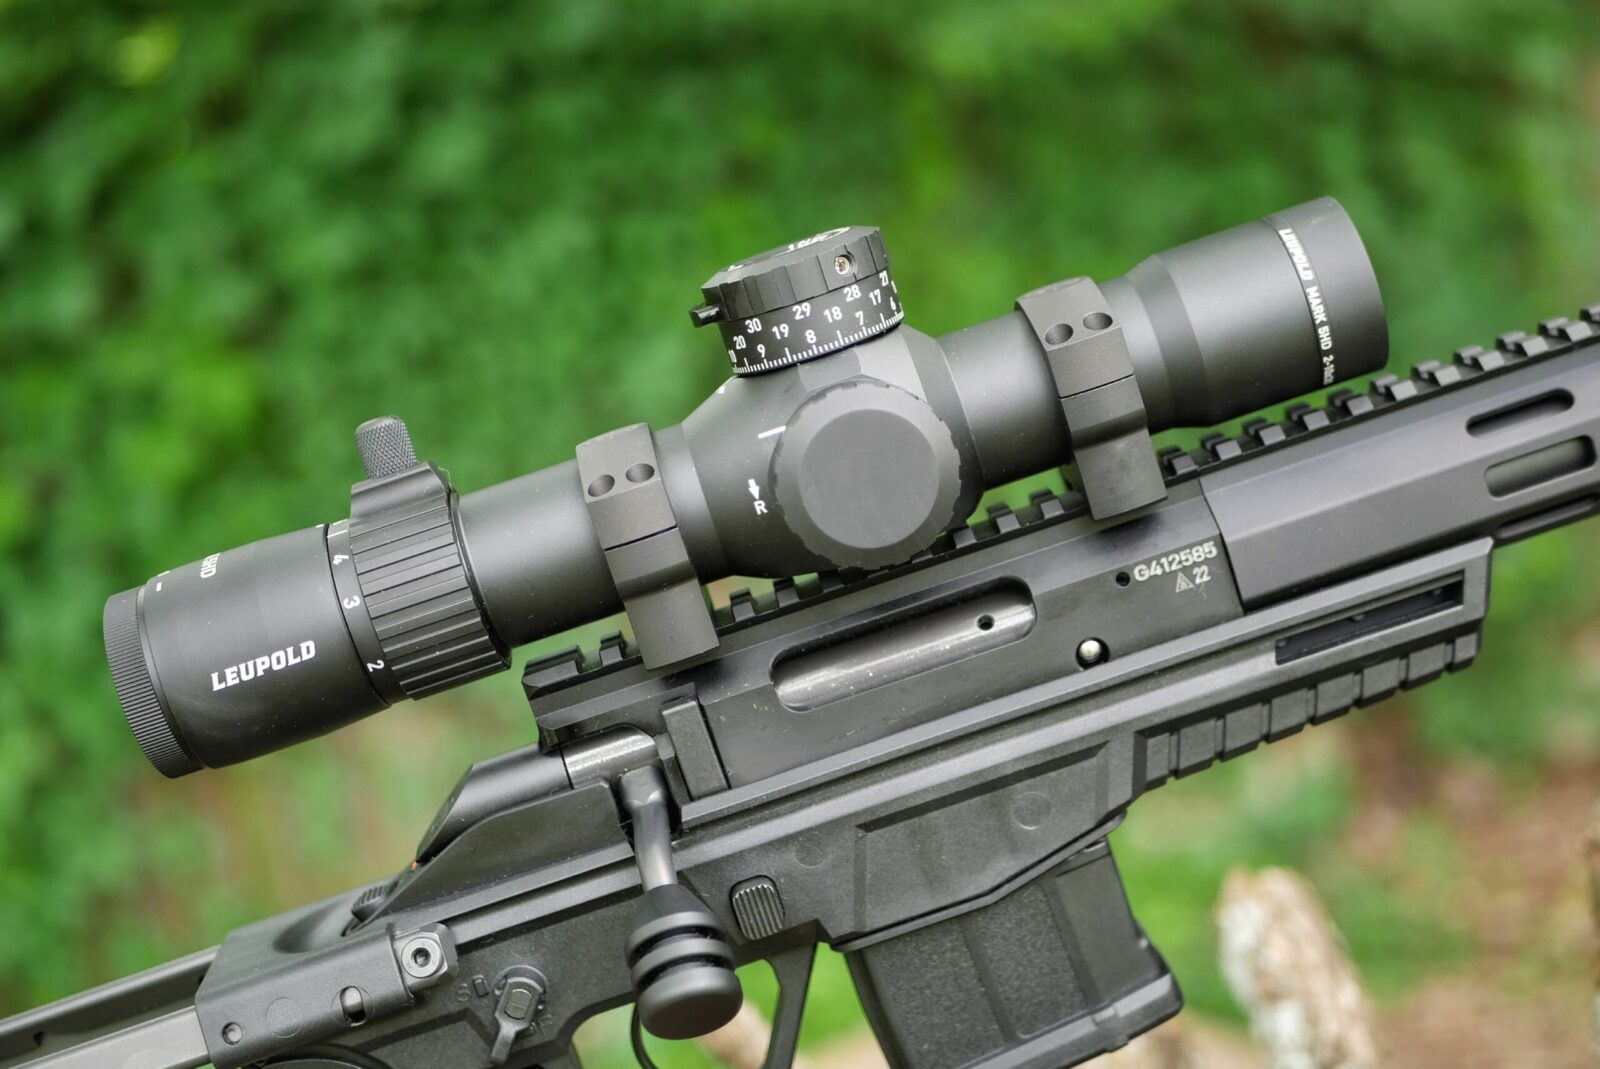 The Tactical Combat Optic Review Leupold Mark 5HD 2 10x30 Rifle Scope